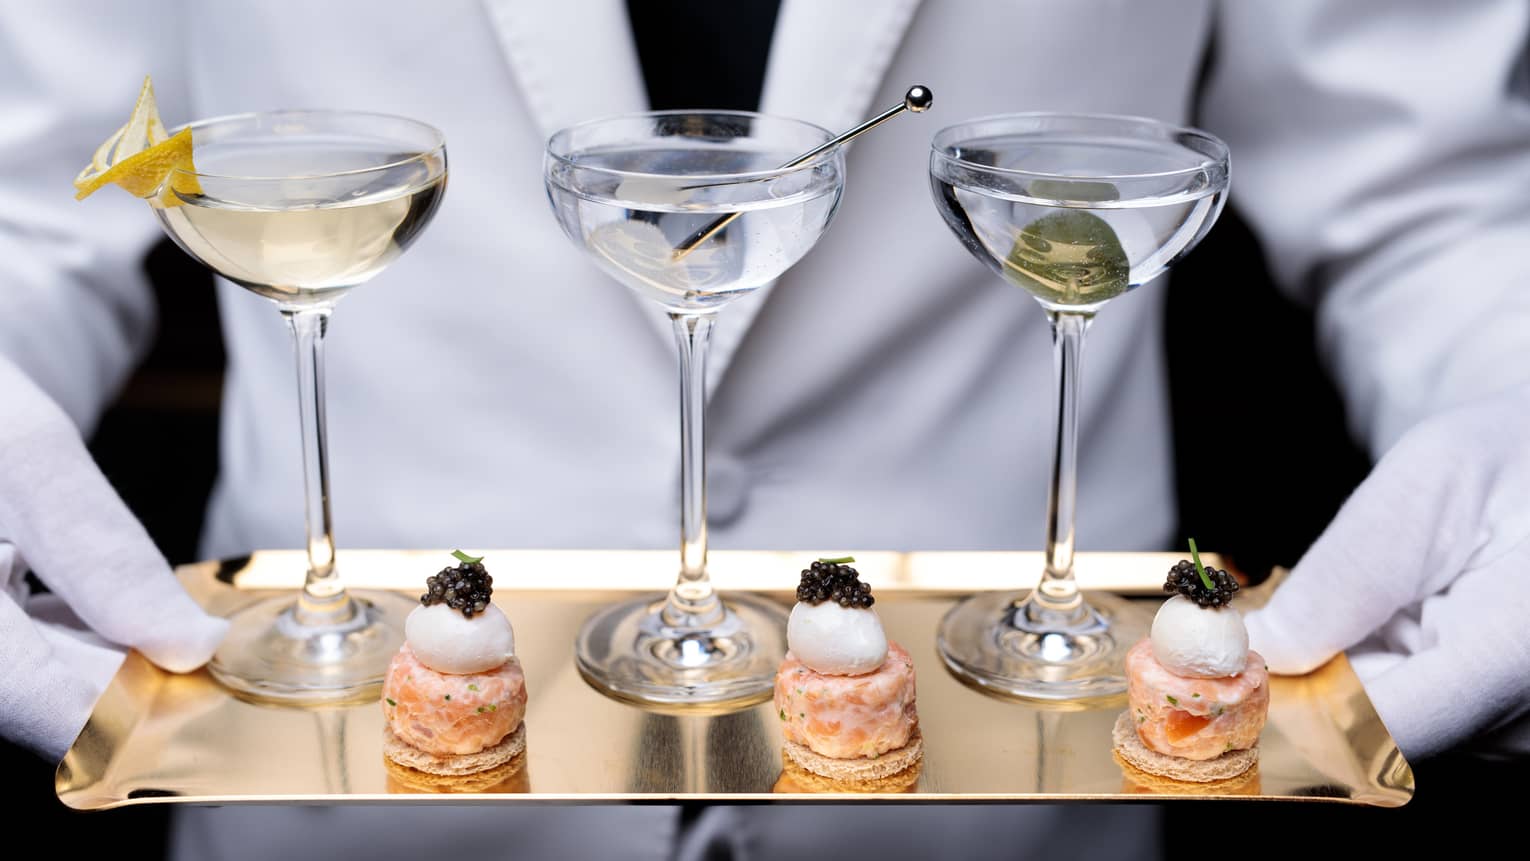 Hotel staff holding brass tray with three martinis, small canapes with caviar